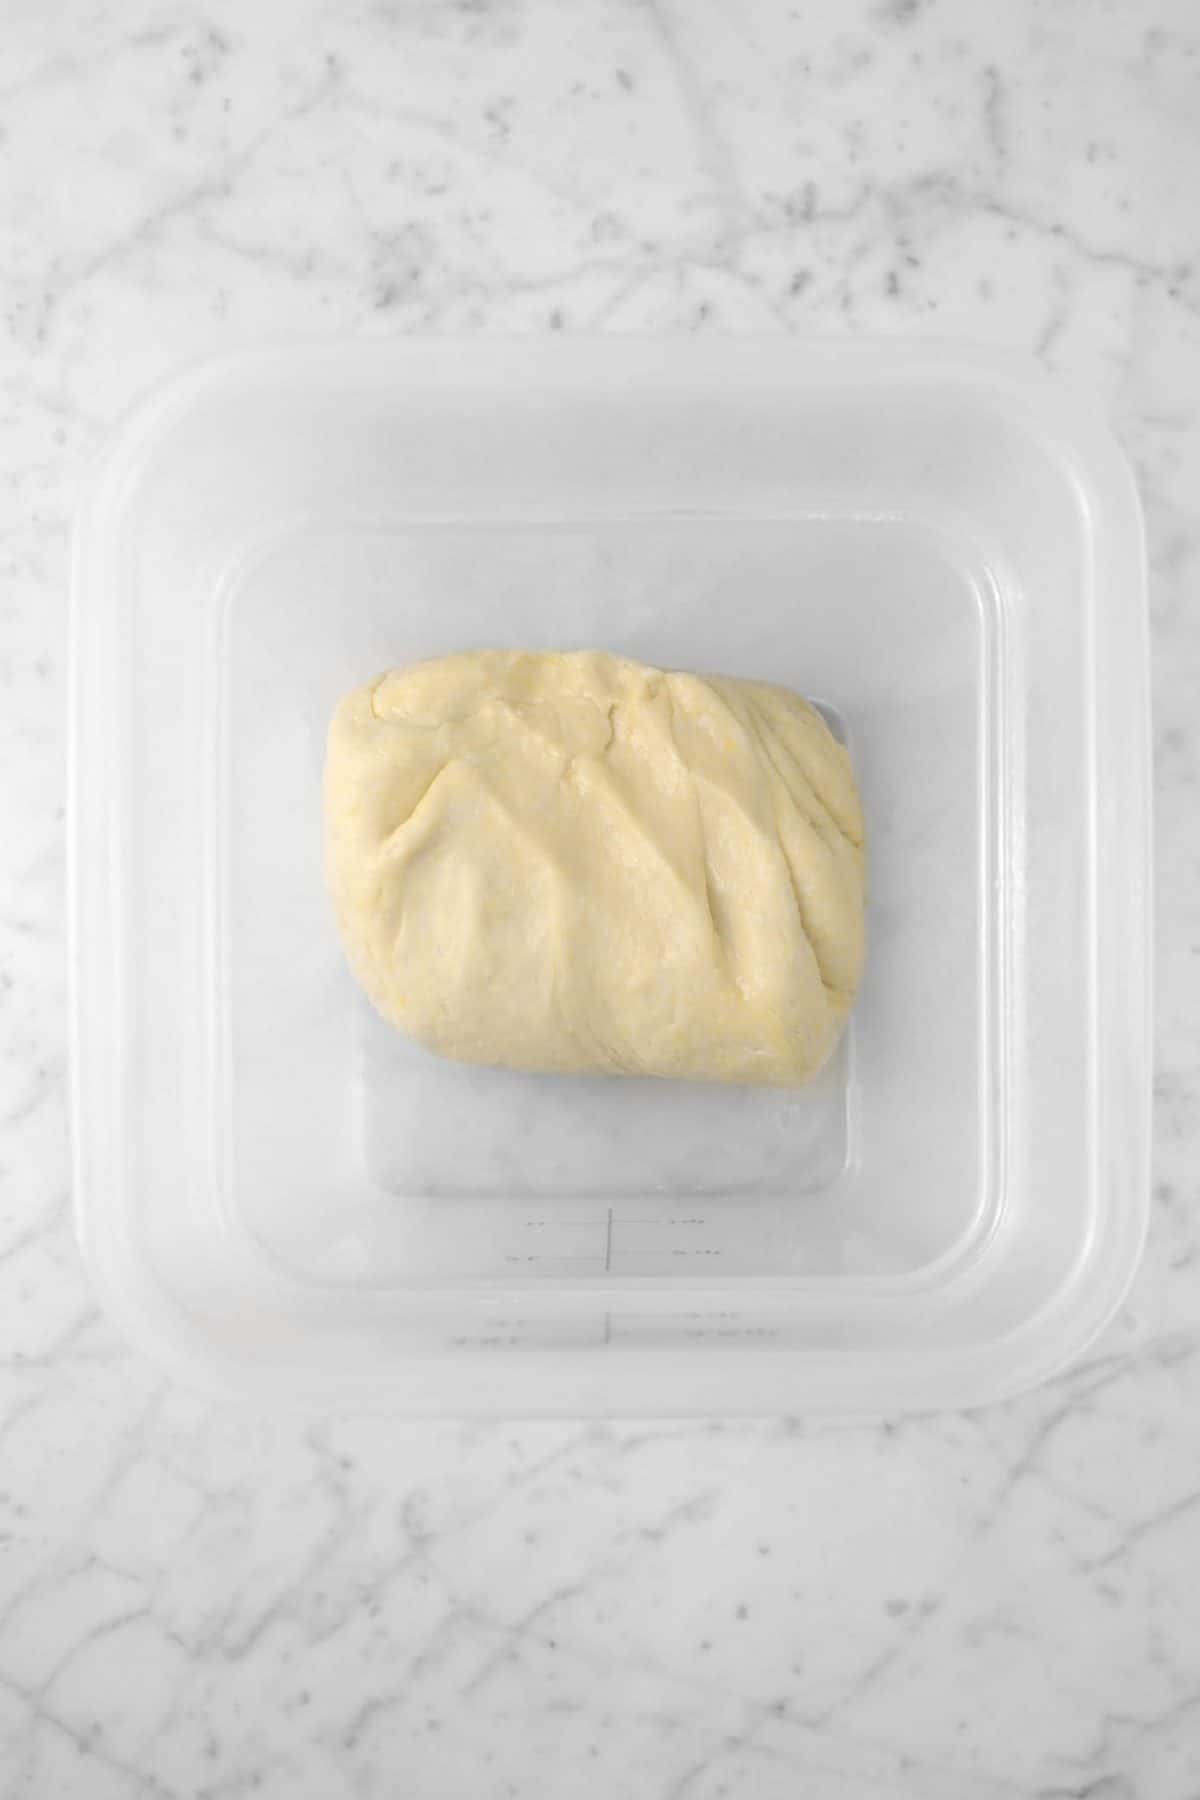 dough folded in half in a plastic container